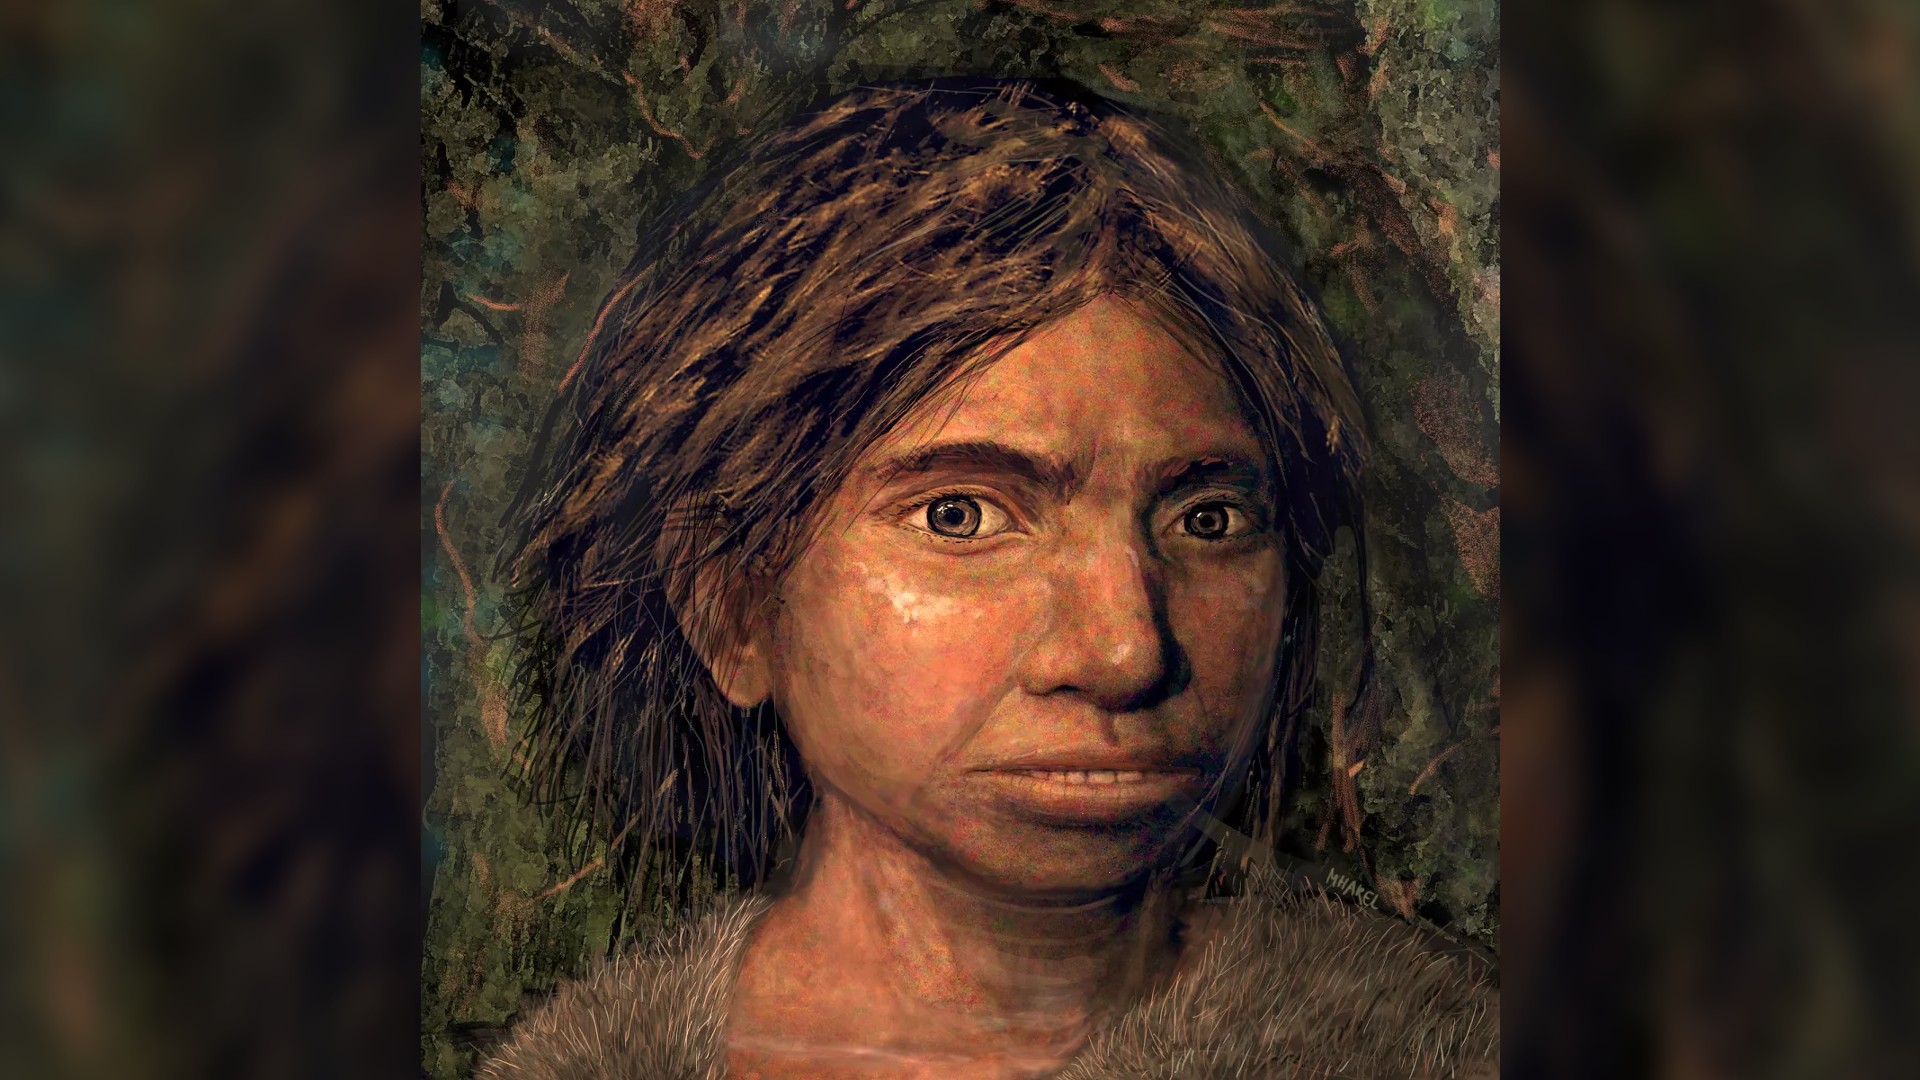 An artist's rendering shows the first-ever portrait of a Denisovan woman, recreated from an ancient DNA sample.